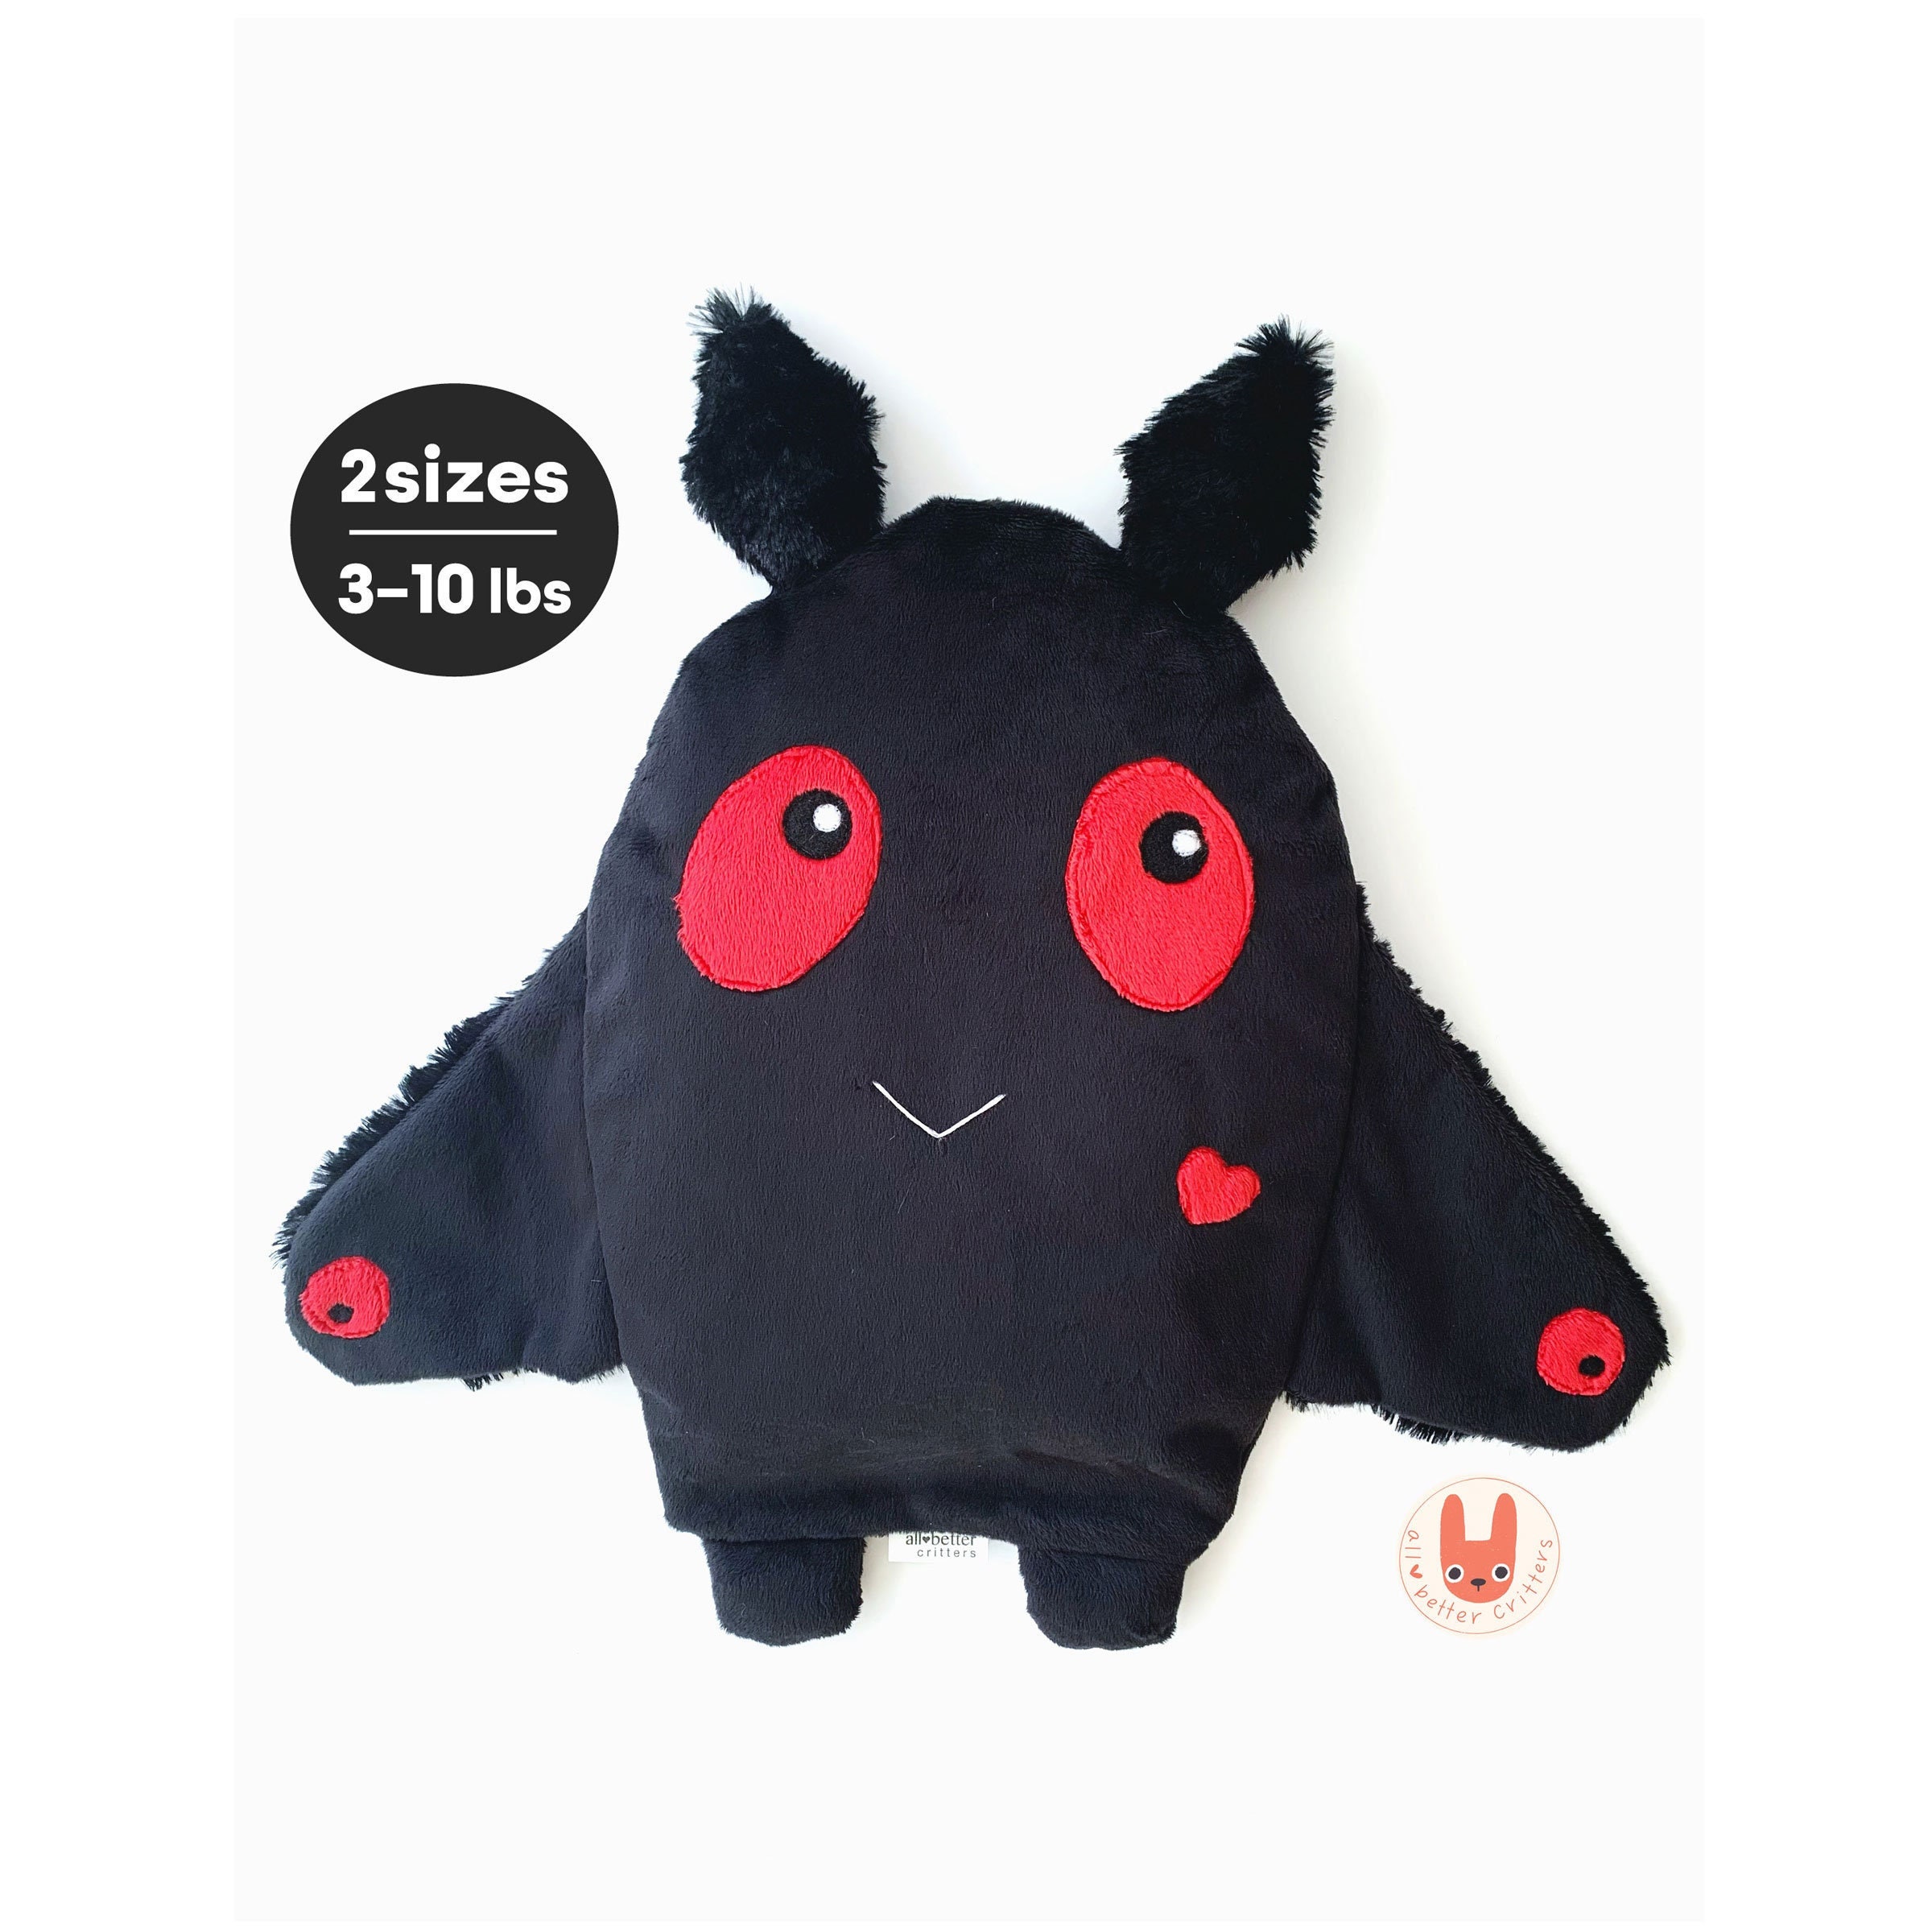 Cute Mothman Weighted Plush Cryptid | MADE TO ORDER | Washable | Heatable | Handmade | Soft Hug Pillow | Unique Relaxation Friend Gift